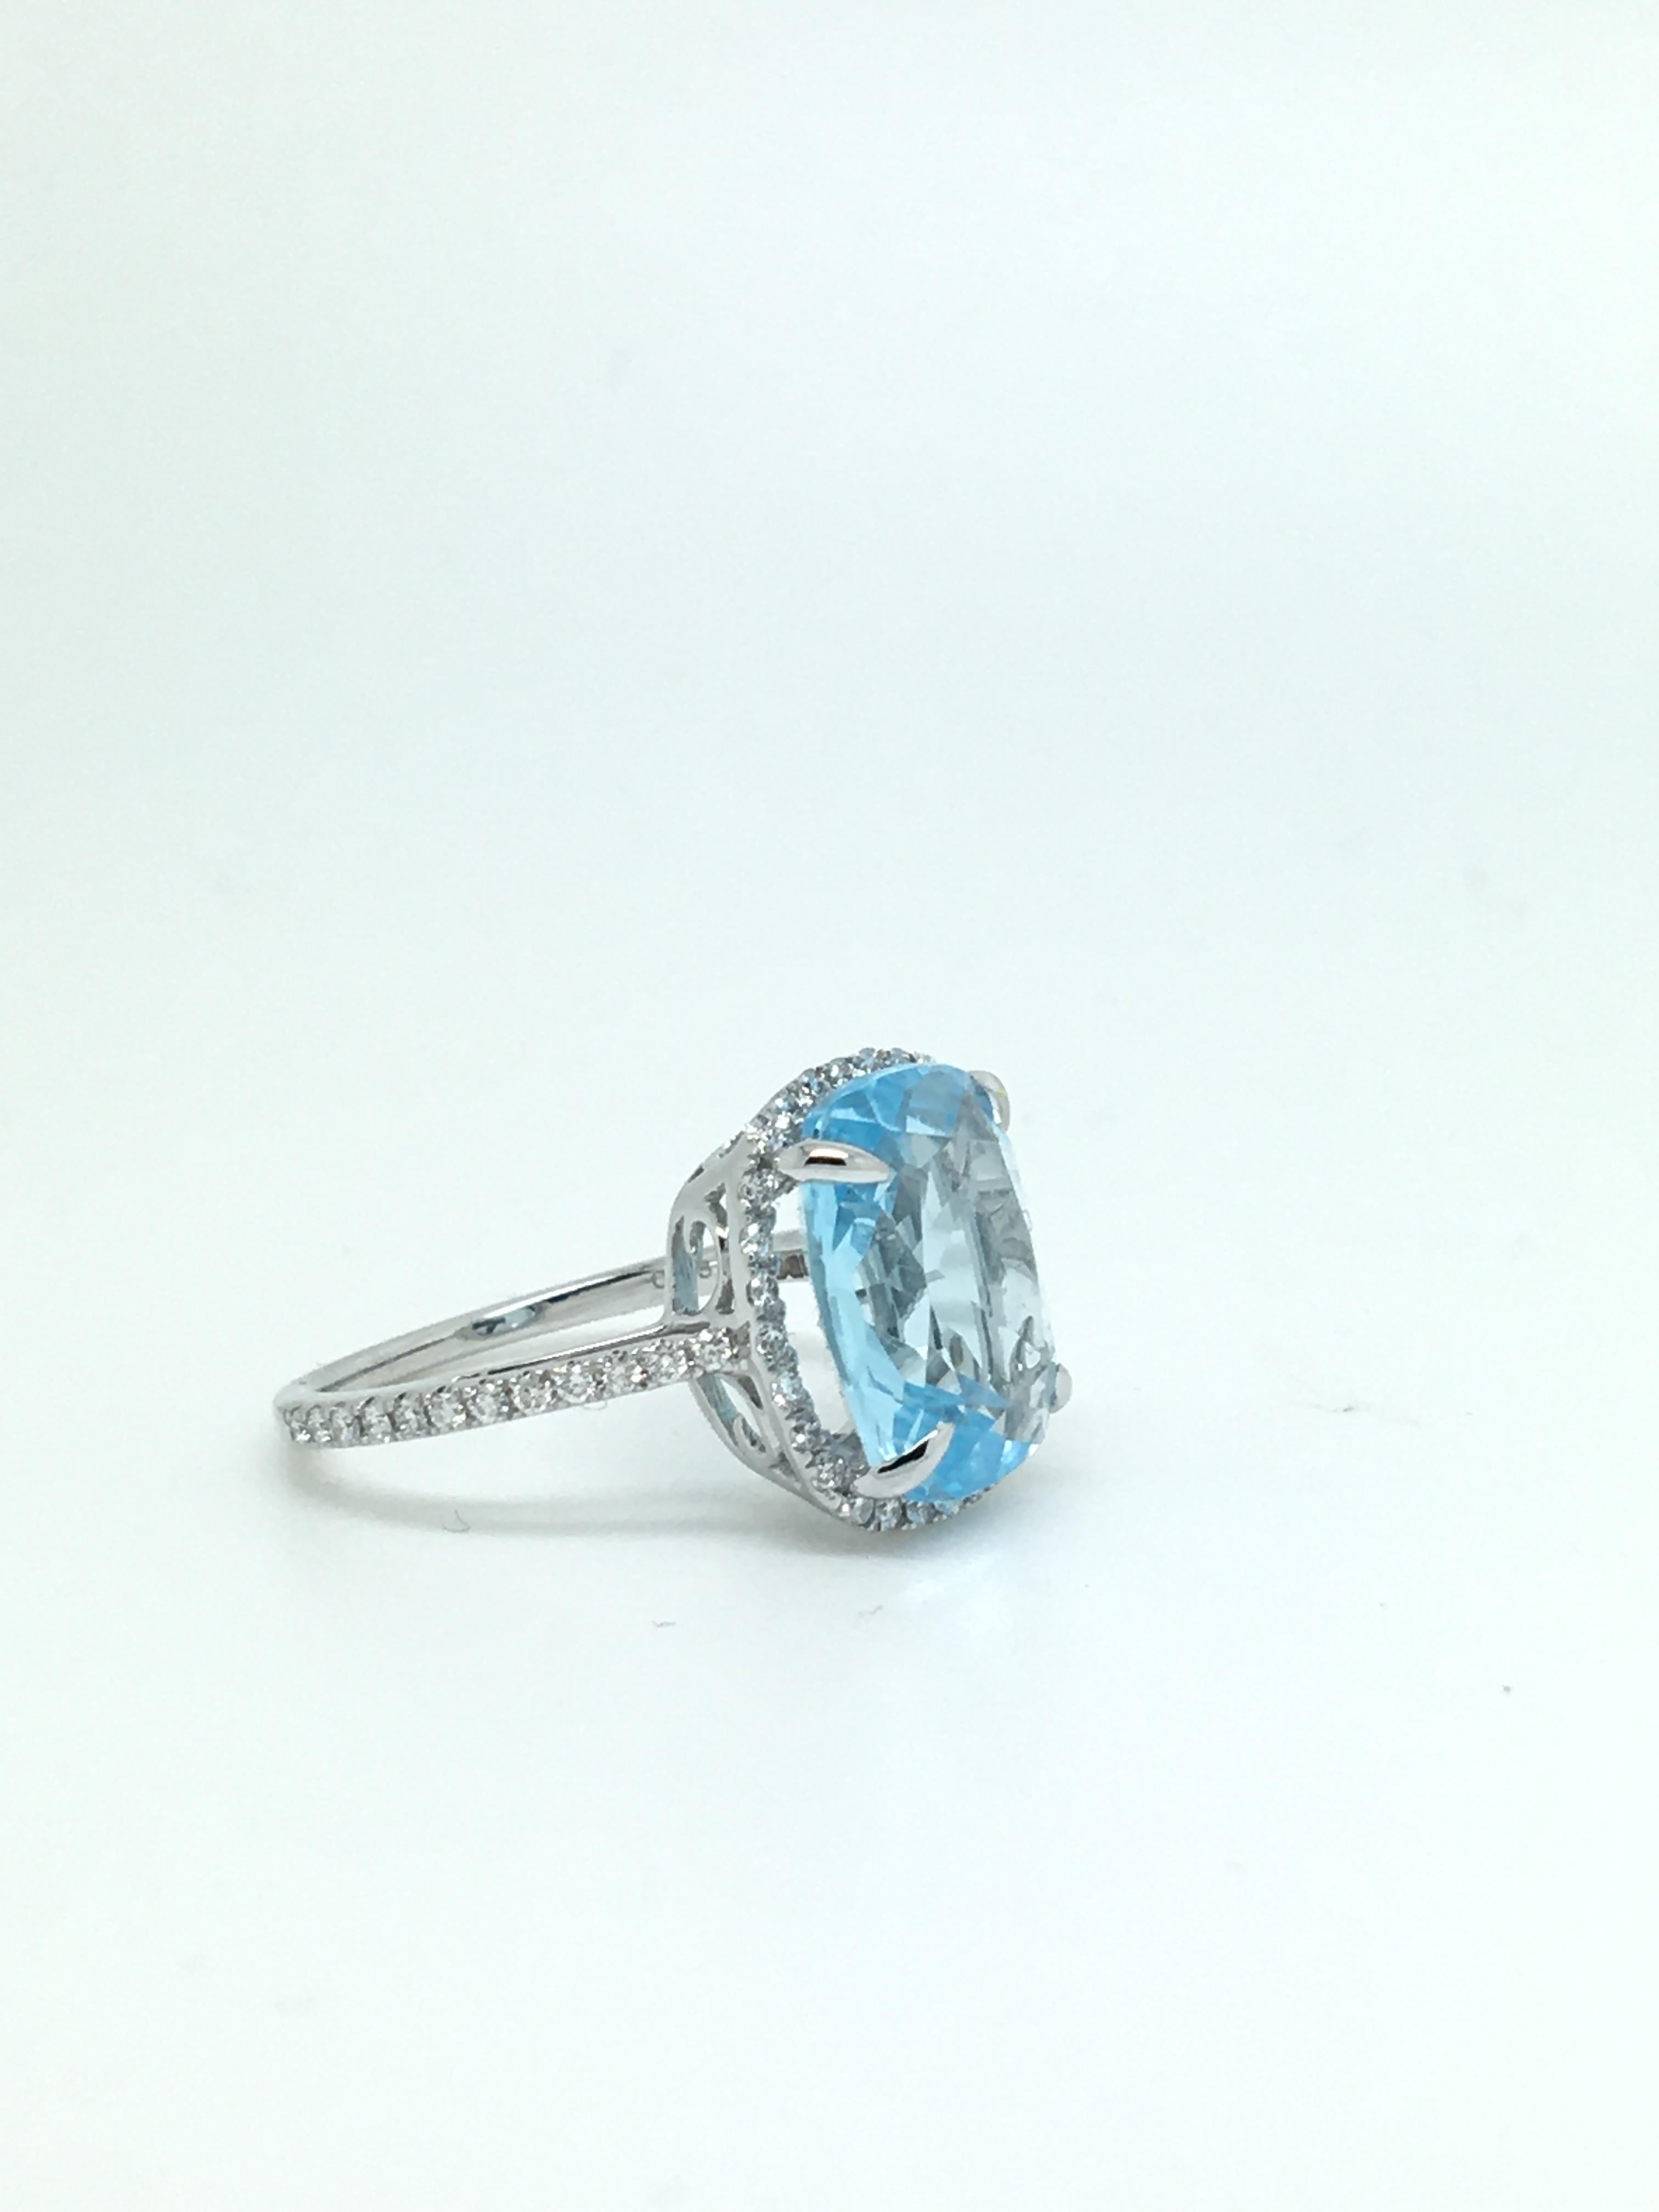 6 Carat Cushion Blue Topaz 18 Karat White Gold 0.38 Carat Diamond Halo Ring In New Condition For Sale In London, GB